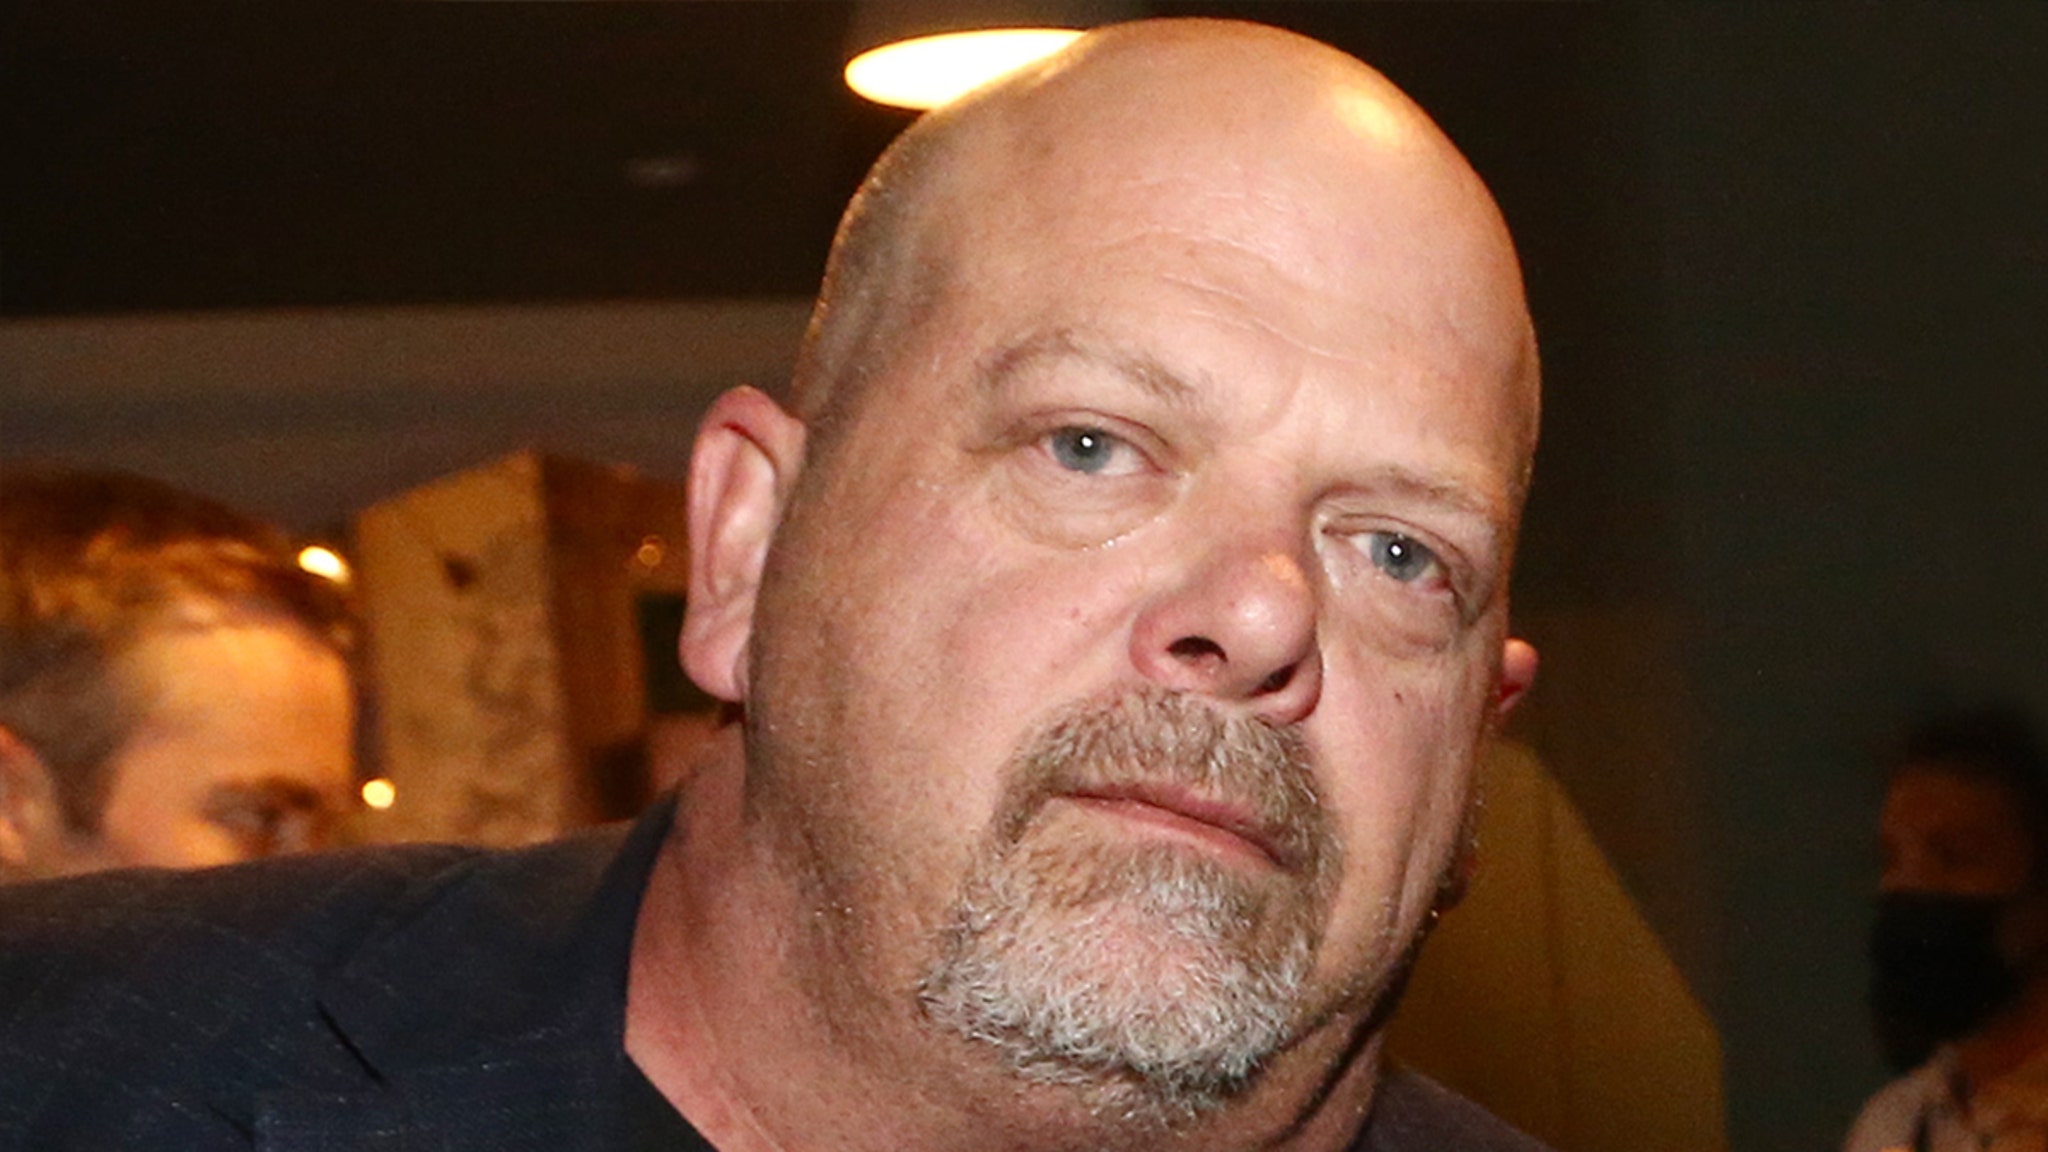 Adam, son of 'Pawn Stars' Rick Harrison, dies at 39 after overdose